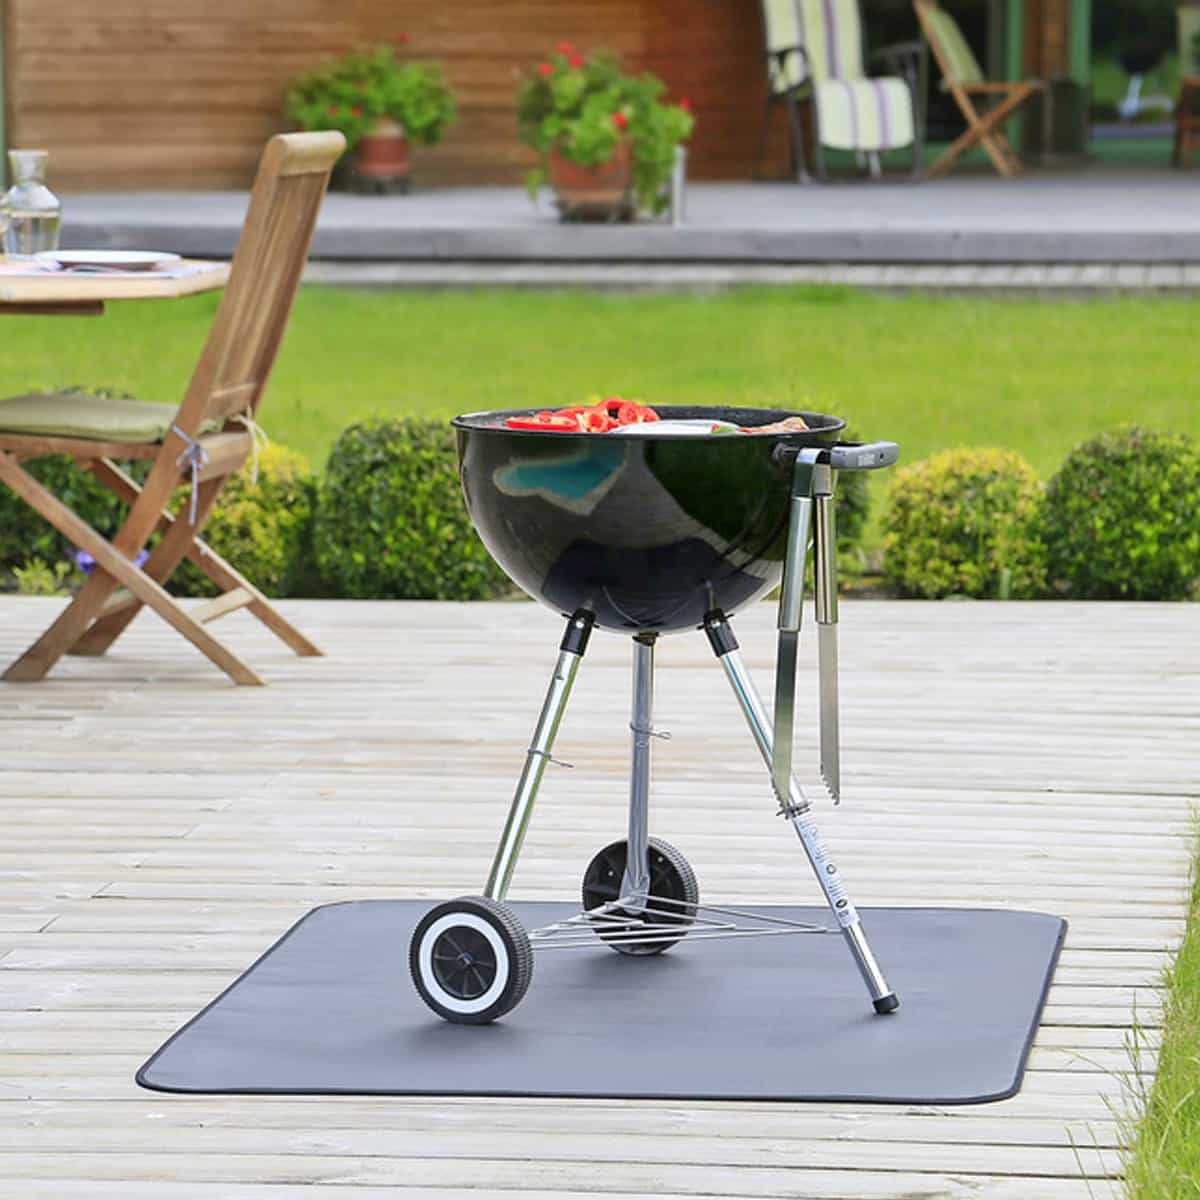 Grand Ignifuge Barbecue Tapis Barbecue Plancher Jardin Patio Sol Protection Mat 